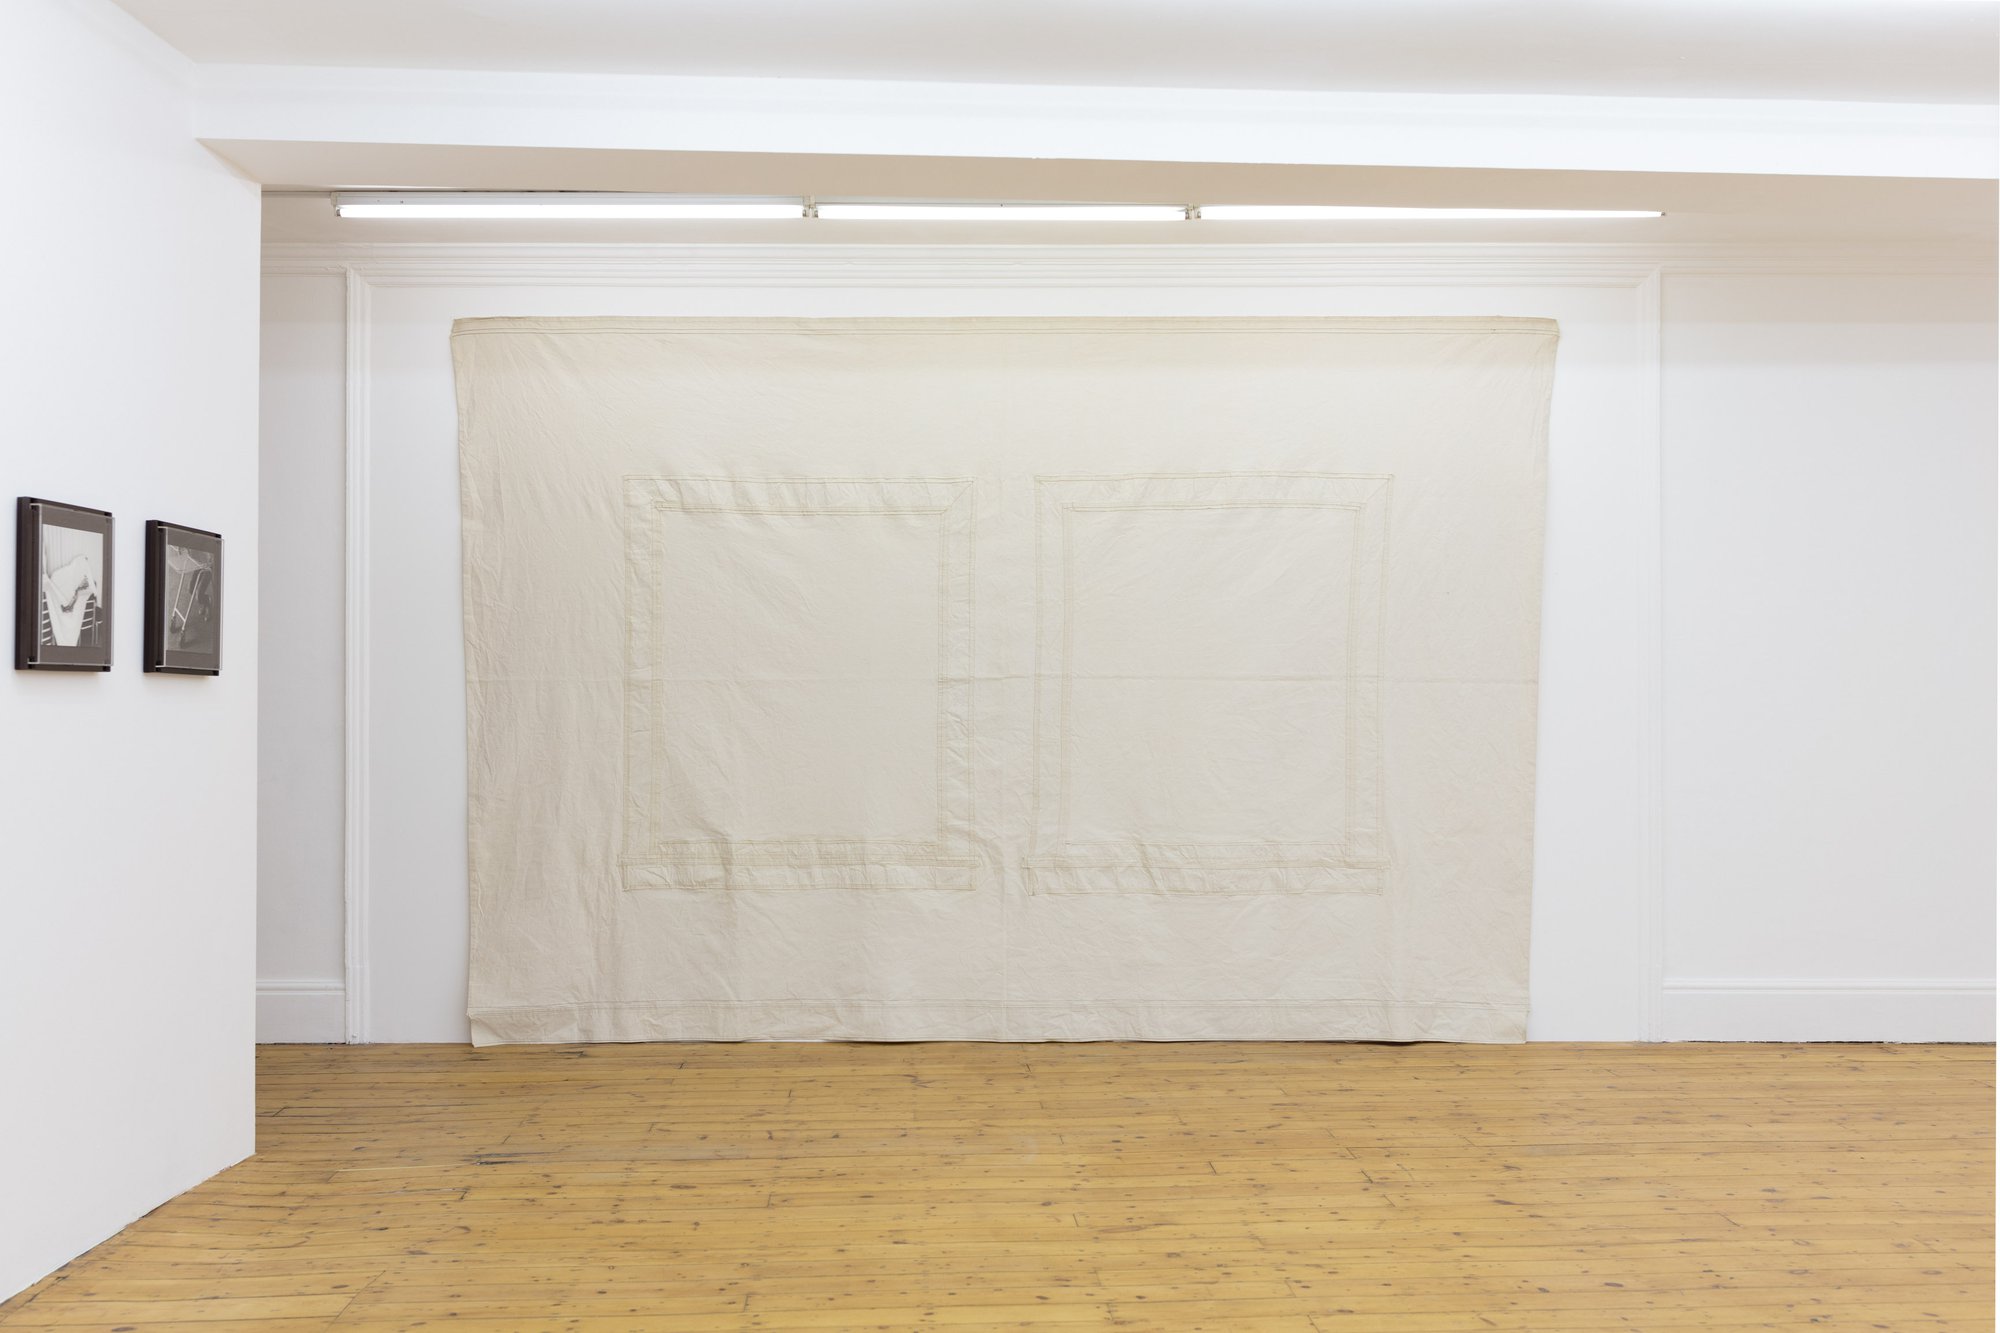 Robert Overby, Two Window Wall Map, 20 August 1972, canvas, 268 x 406.4 cm. Installation view, Condo: Rodeo / Andrew Kreps, Robert Overby / Ian Law, Rodeo, London, 2017